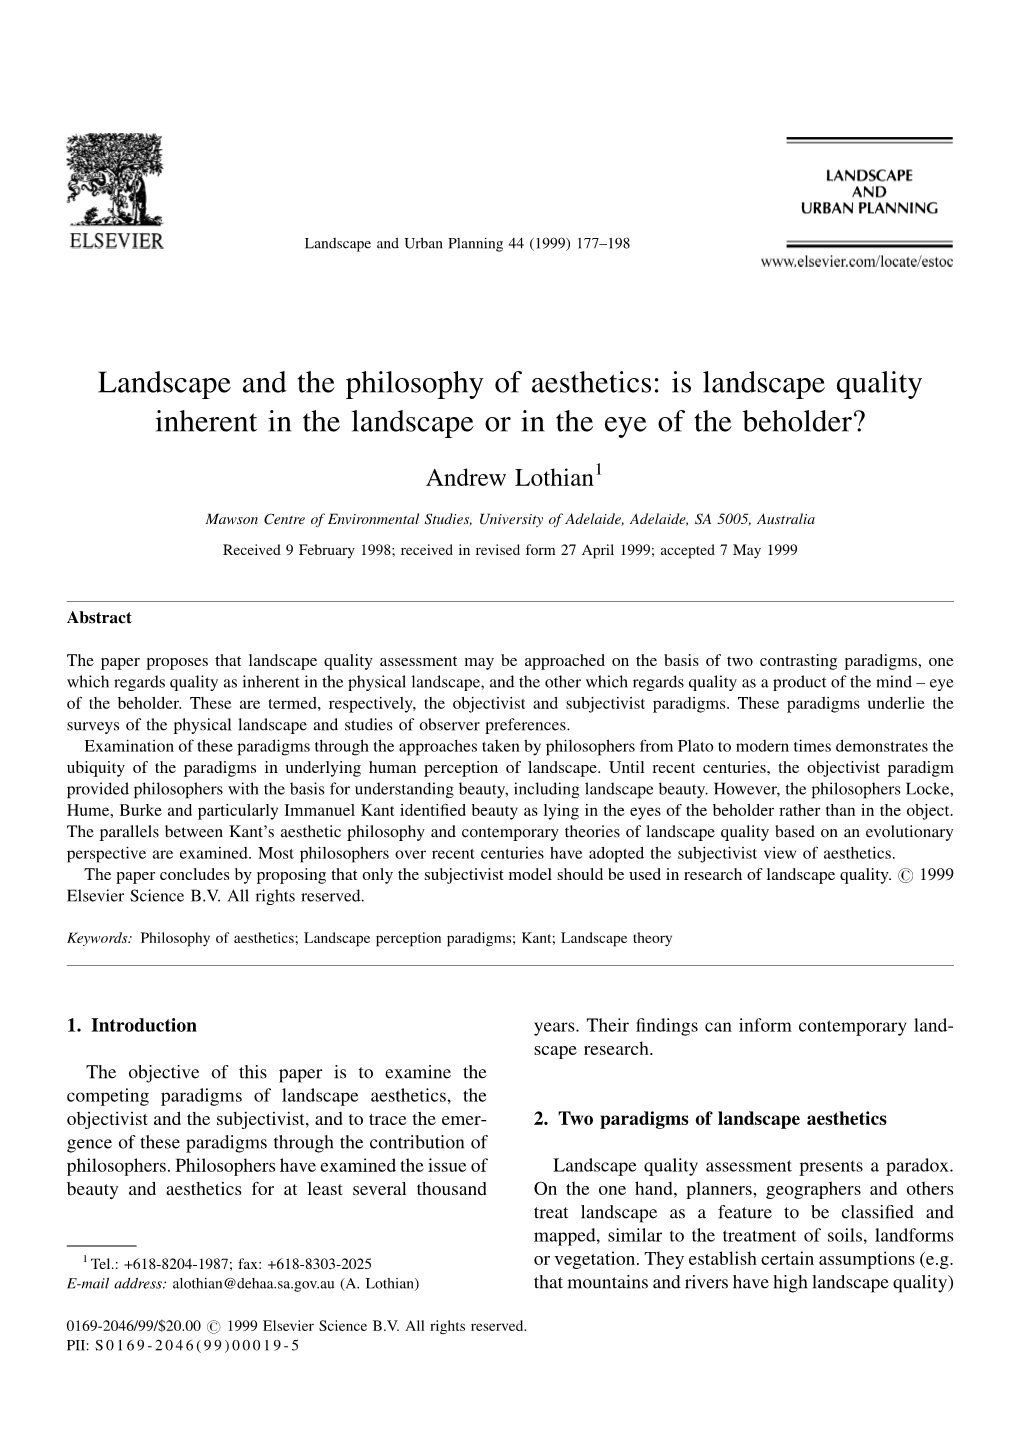 Landscape and the Philosophy of Aesthetics: Is Landscape Quality Inherent in the Landscape Or in the Eye of the Beholder?